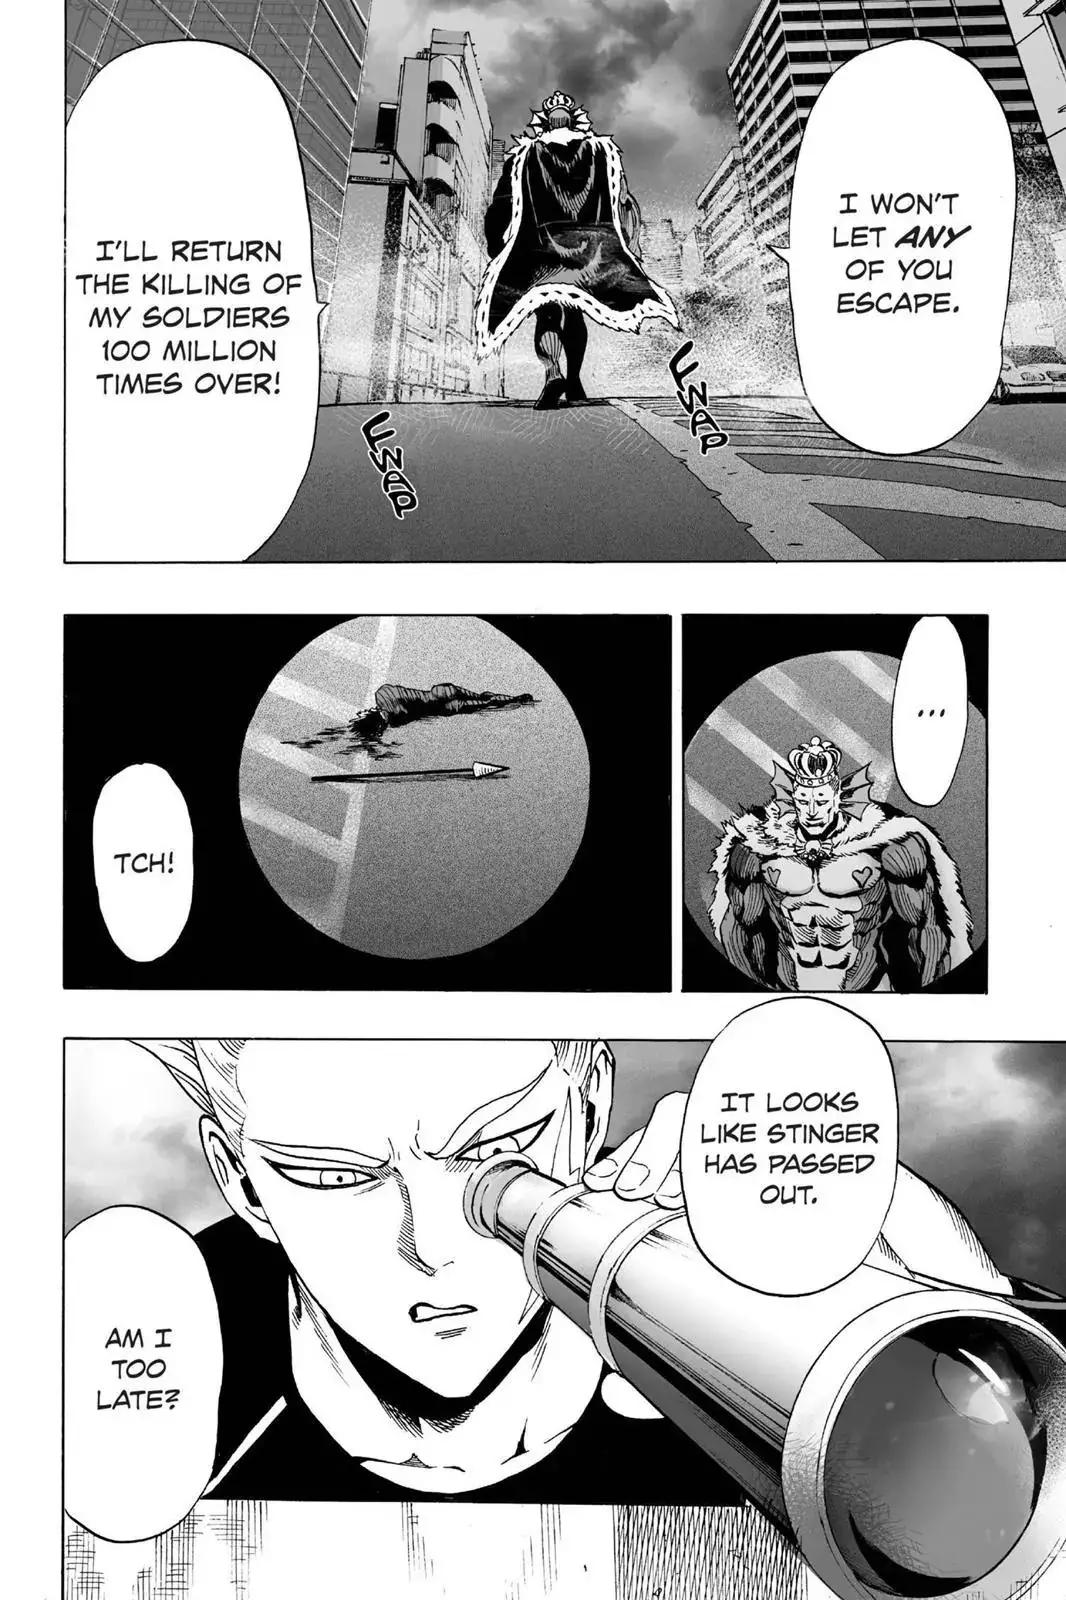 One Punch Man Chapter 24, READ One Punch Man Chapter 24 ONLINE, lost in the cloud genre,lost in the cloud gif,lost in the cloud girl,lost in the cloud goods,lost in the cloud goodreads,lost in the cloud,lost ark cloud gaming,lost odyssey cloud gaming,lost in the cloud fanart,lost in the cloud fanfic,lost in the cloud fandom,lost in the cloud first kiss,lost in the cloud font,lost in the cloud ending,lost in the cloud episode 97,lost in the cloud edit,lost in the cloud explained,lost in the cloud dog,lost in the cloud discord server,lost in the cloud desktop wallpaper,lost in the cloud drawing,can't find my cloud on network,lost in the cloud characters,lost in the cloud chapter 93 release date,lost in the cloud birthday,lost in the cloud birthday art,lost in the cloud background,lost in the cloud banner,lost in the clouds meaning,what is the black cloud in lost,lost in the cloud ao3,lost in the cloud anime,lost in the cloud art,lost in the cloud author twitter,lost in the cloud author instagram,lost in the cloud artist,lost in the cloud acrylic stand,lost in the cloud artist twitter,lost in the cloud art style,lost in the cloud analysis